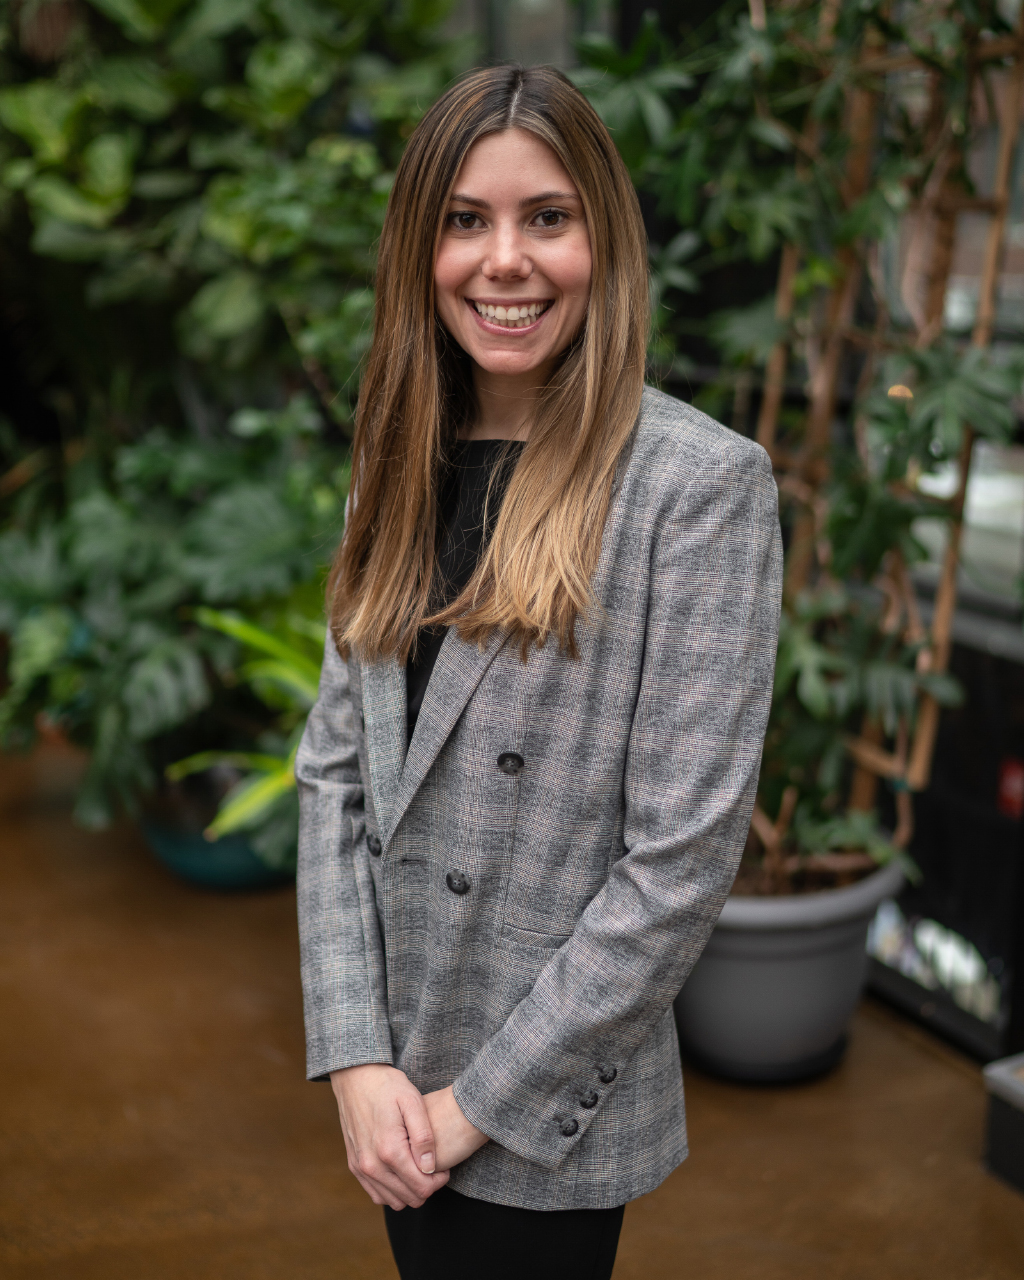 Photo of Danielle standing in front of plants in a well-lit area